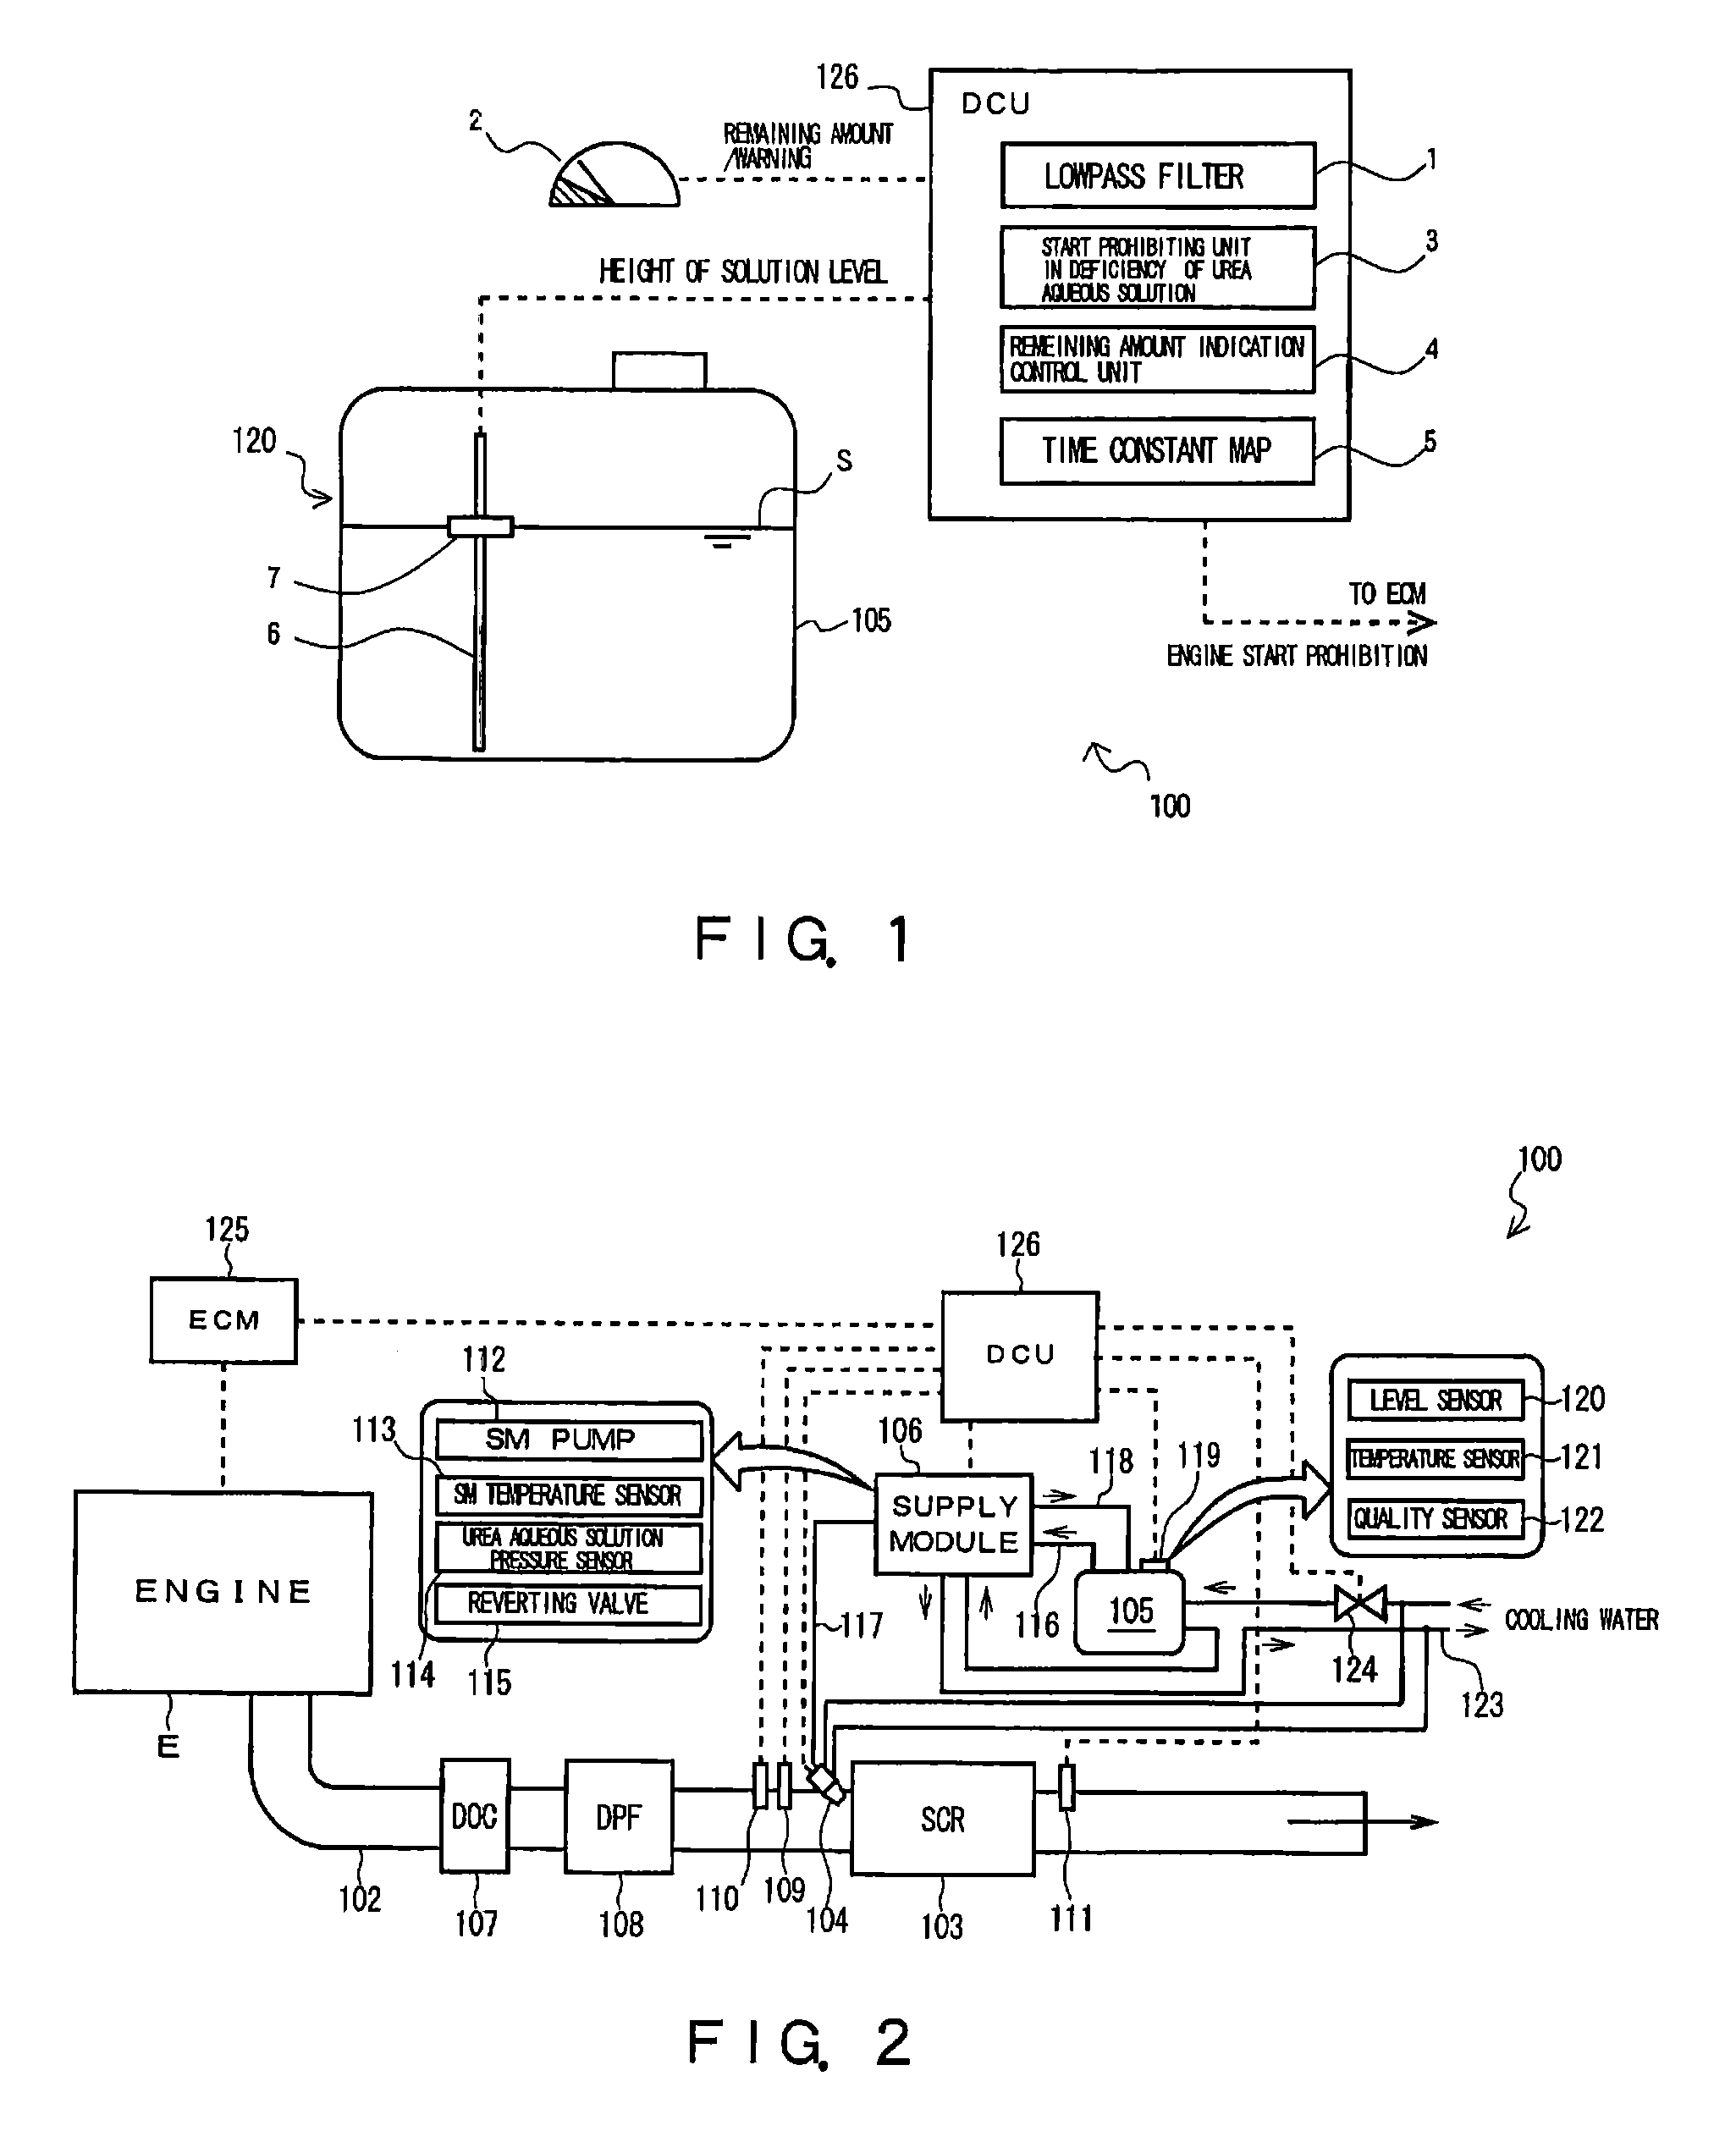 Selective catalytic reduction system